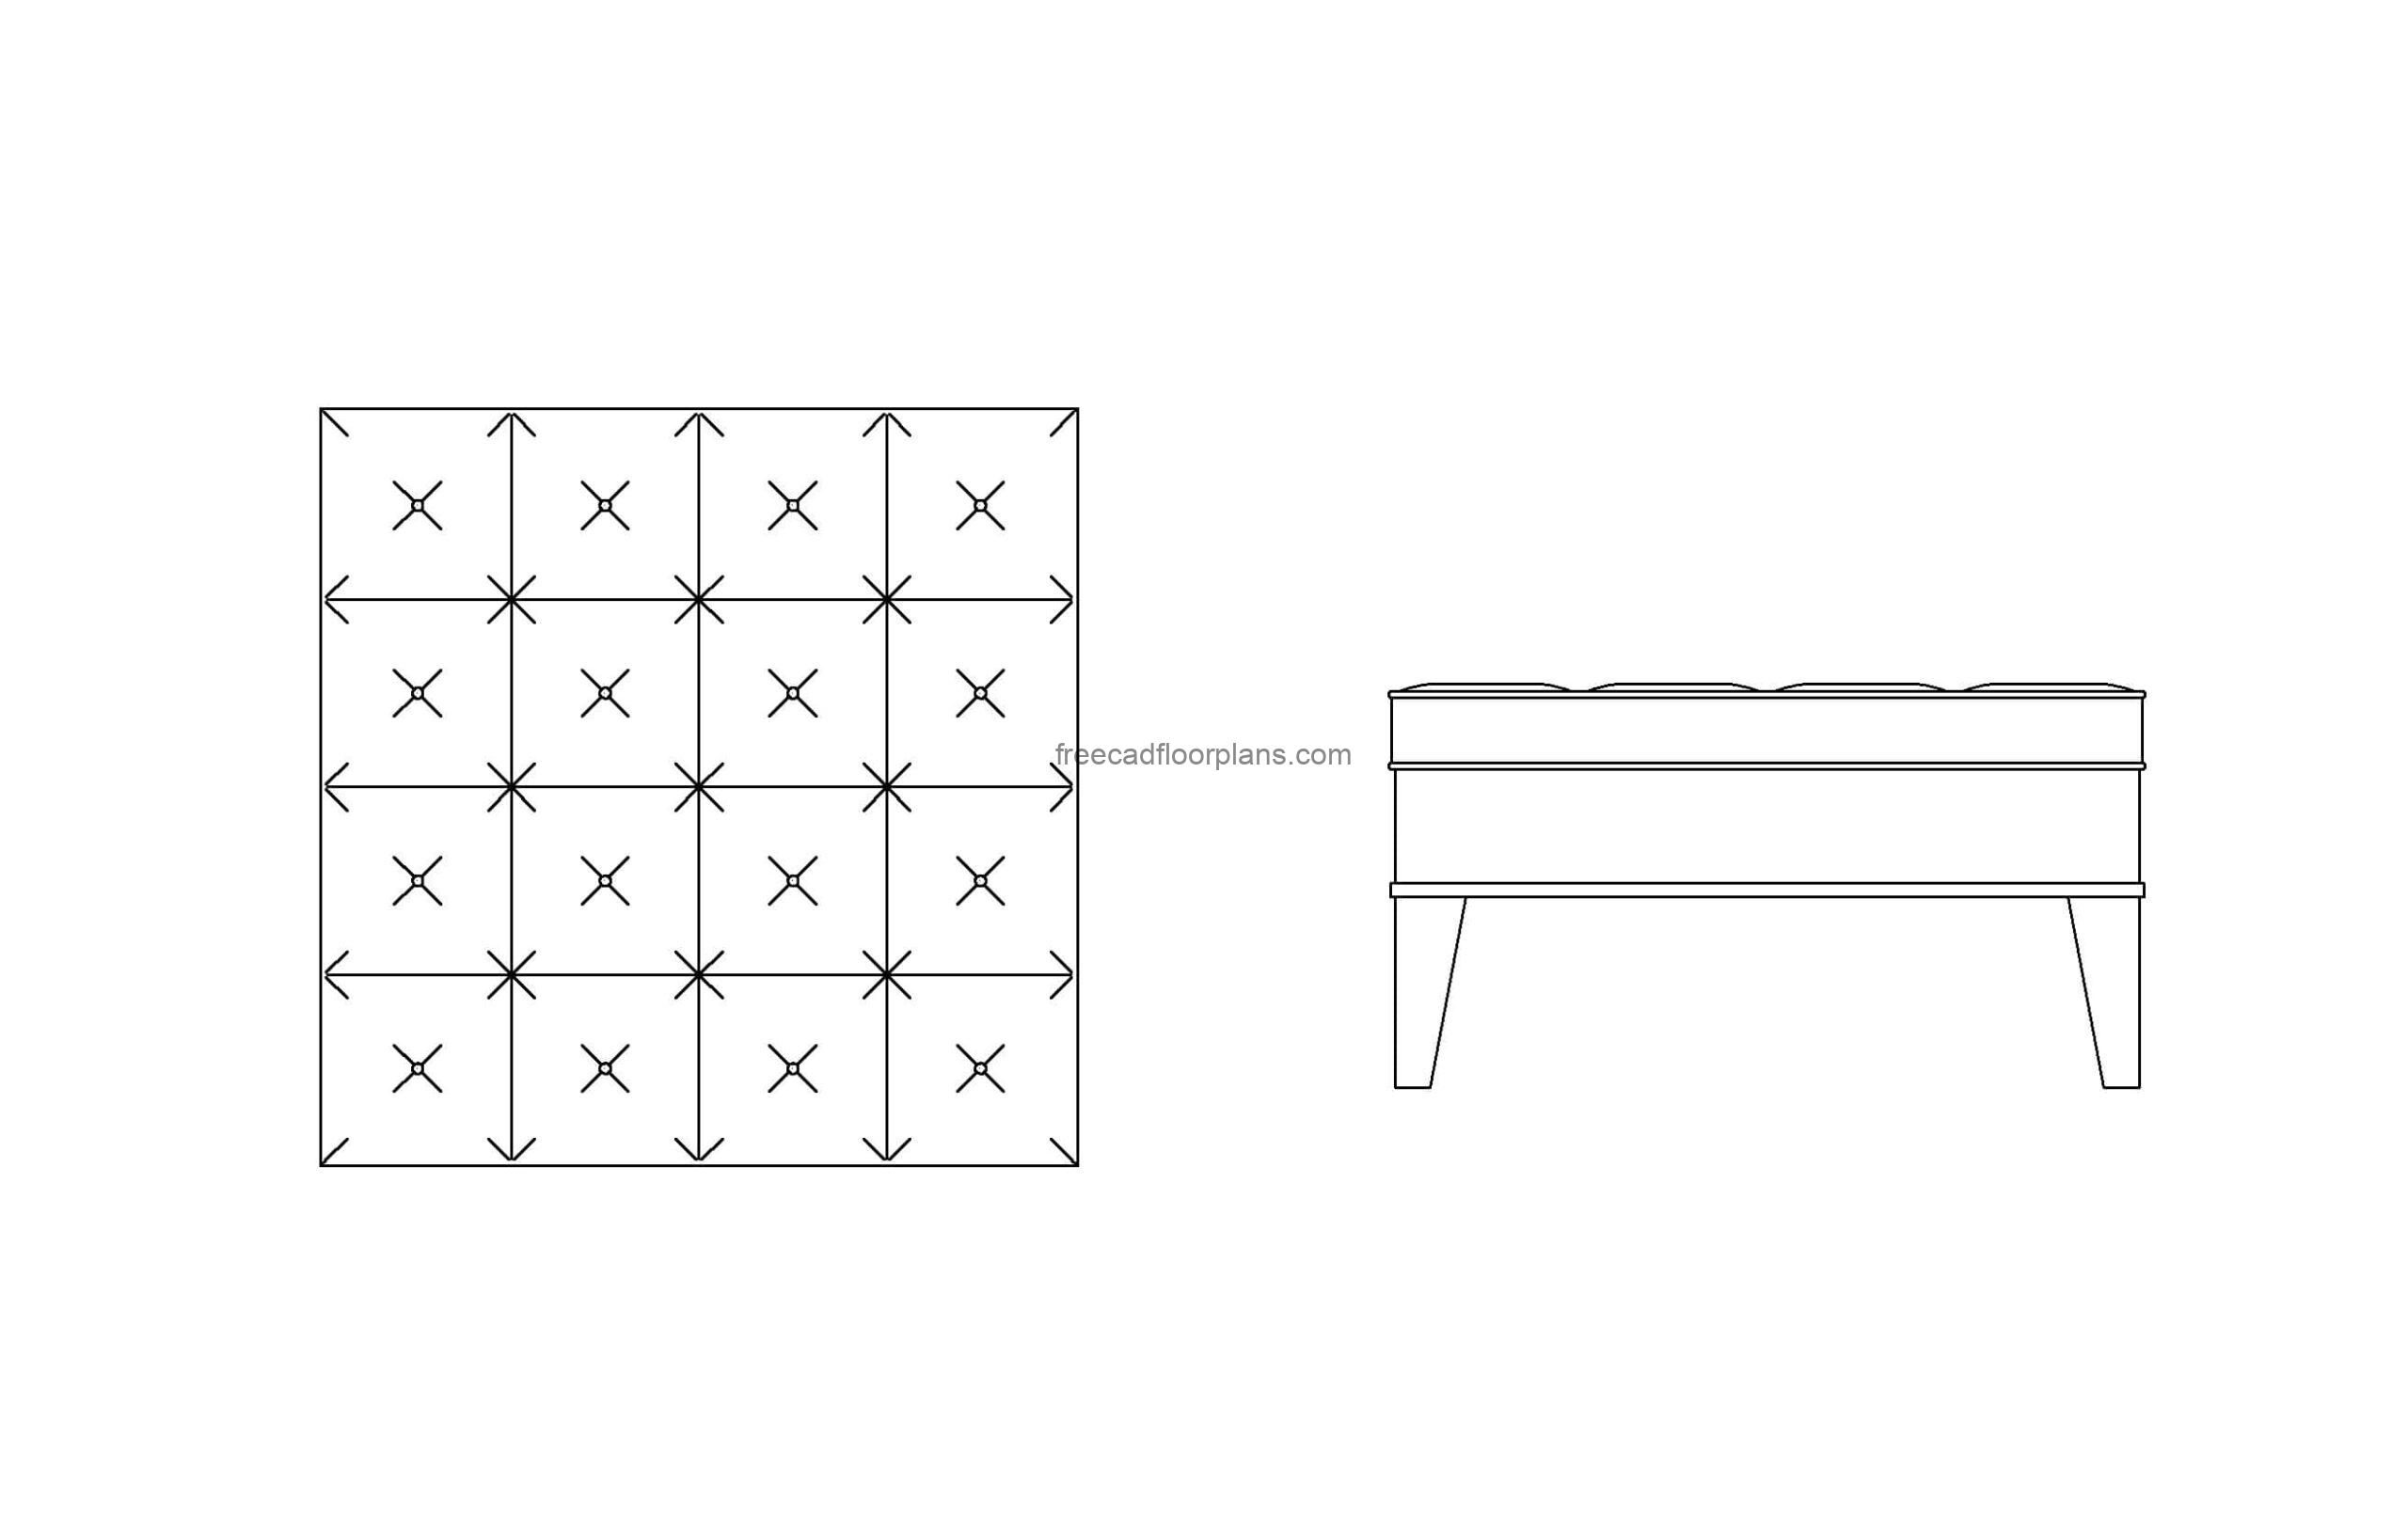 Square Tufted Ottoman autocad drawing all 2d views plan and elevations dwg file for free download